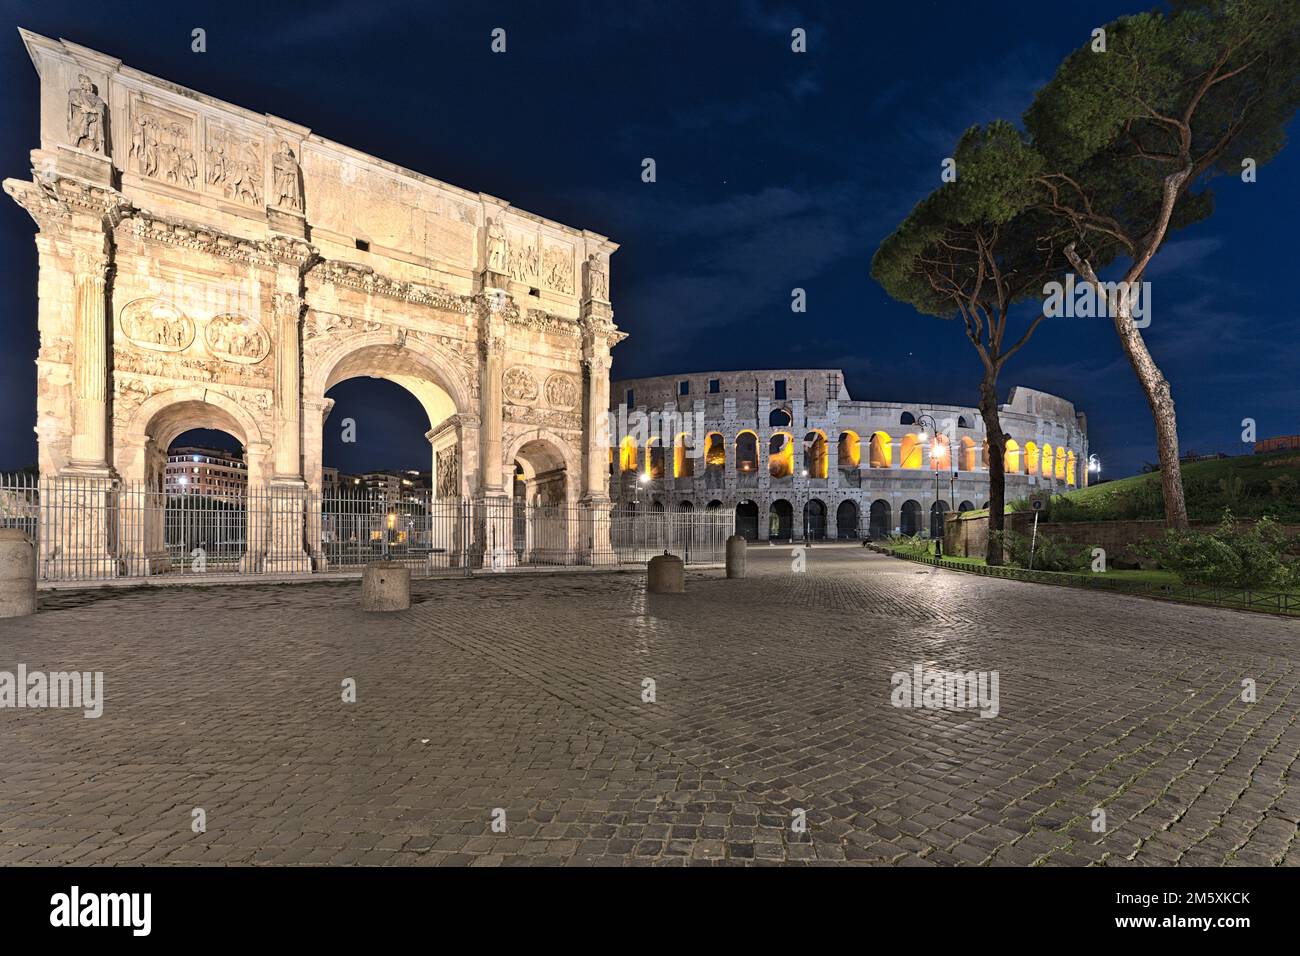 View on the Collosseum and the Arco di Costantino at night time. Only one indistinguishable person is sitting on a bench. Stock Photo